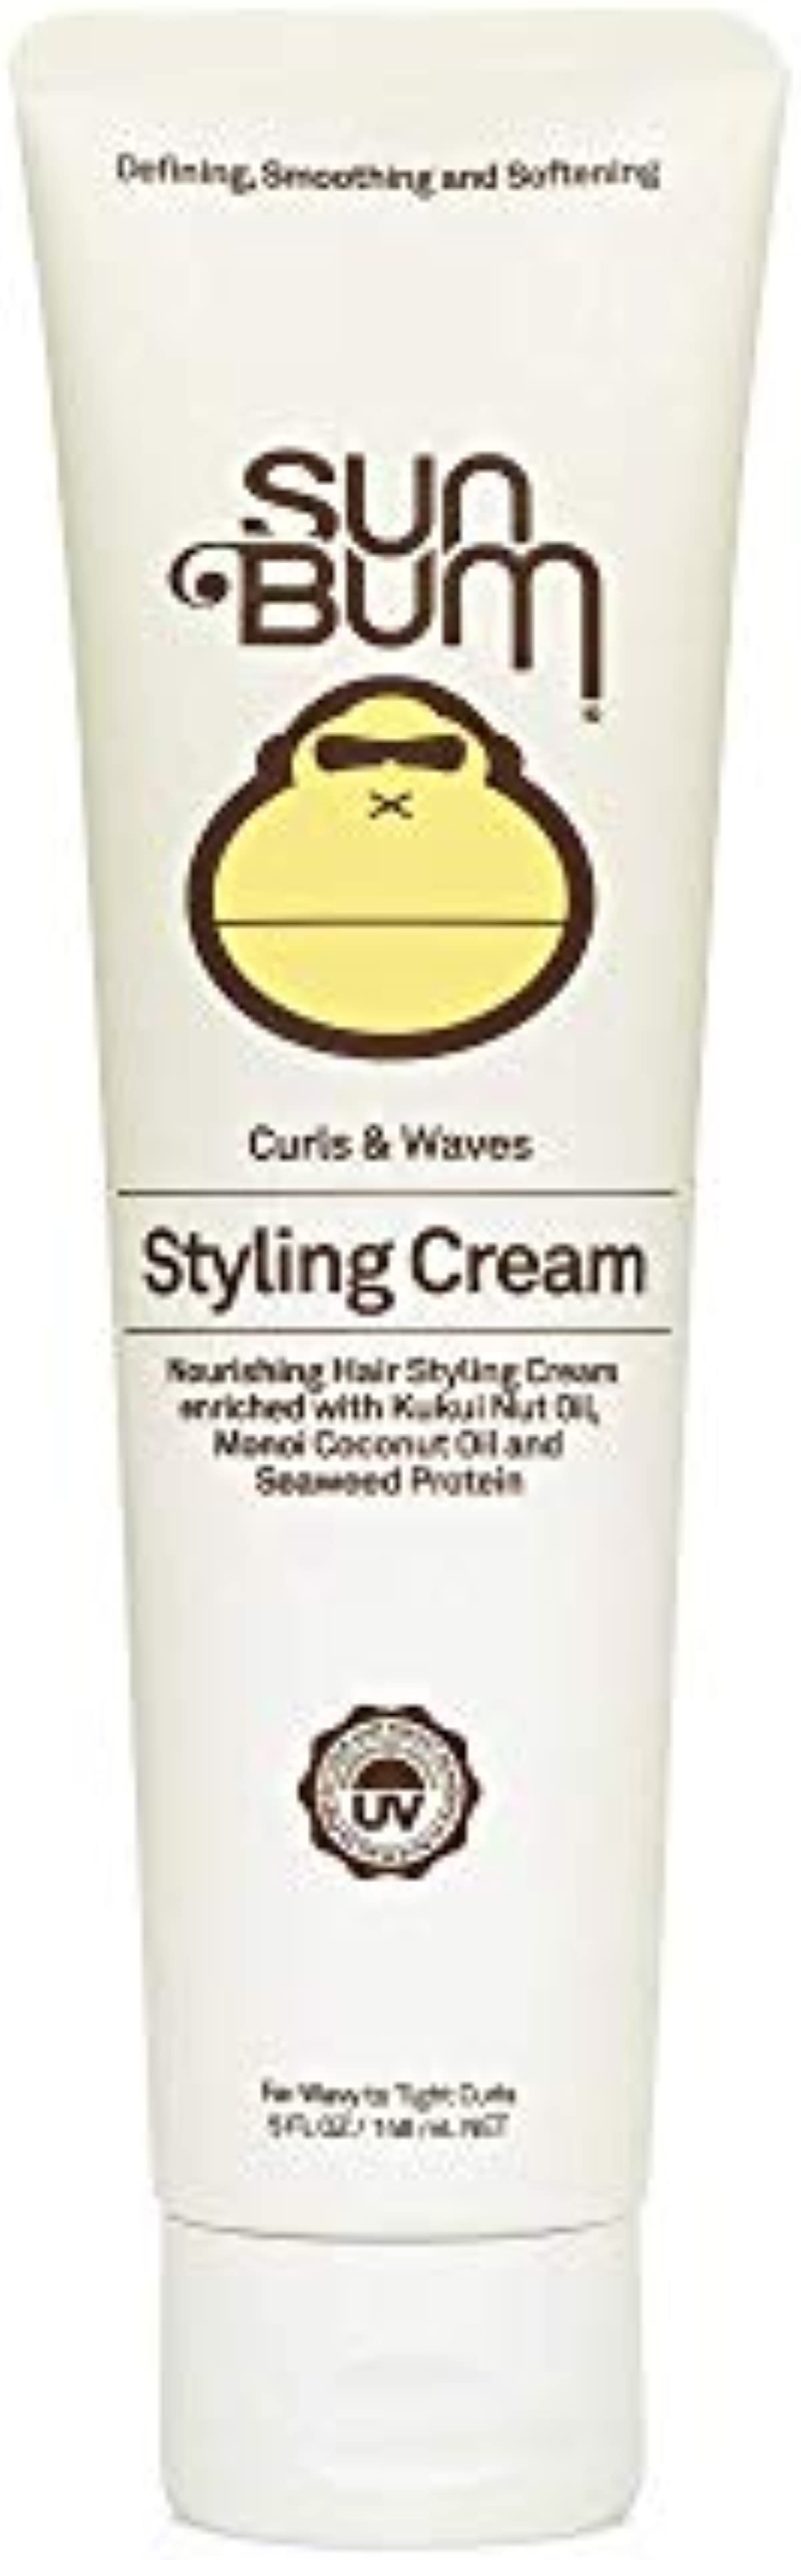 Sun Bum Curls & Waves Styling Cream | Vegan and Cruelty Free Moisturizing Hair Treatment for Wavy and Curly Hair | 5 oz